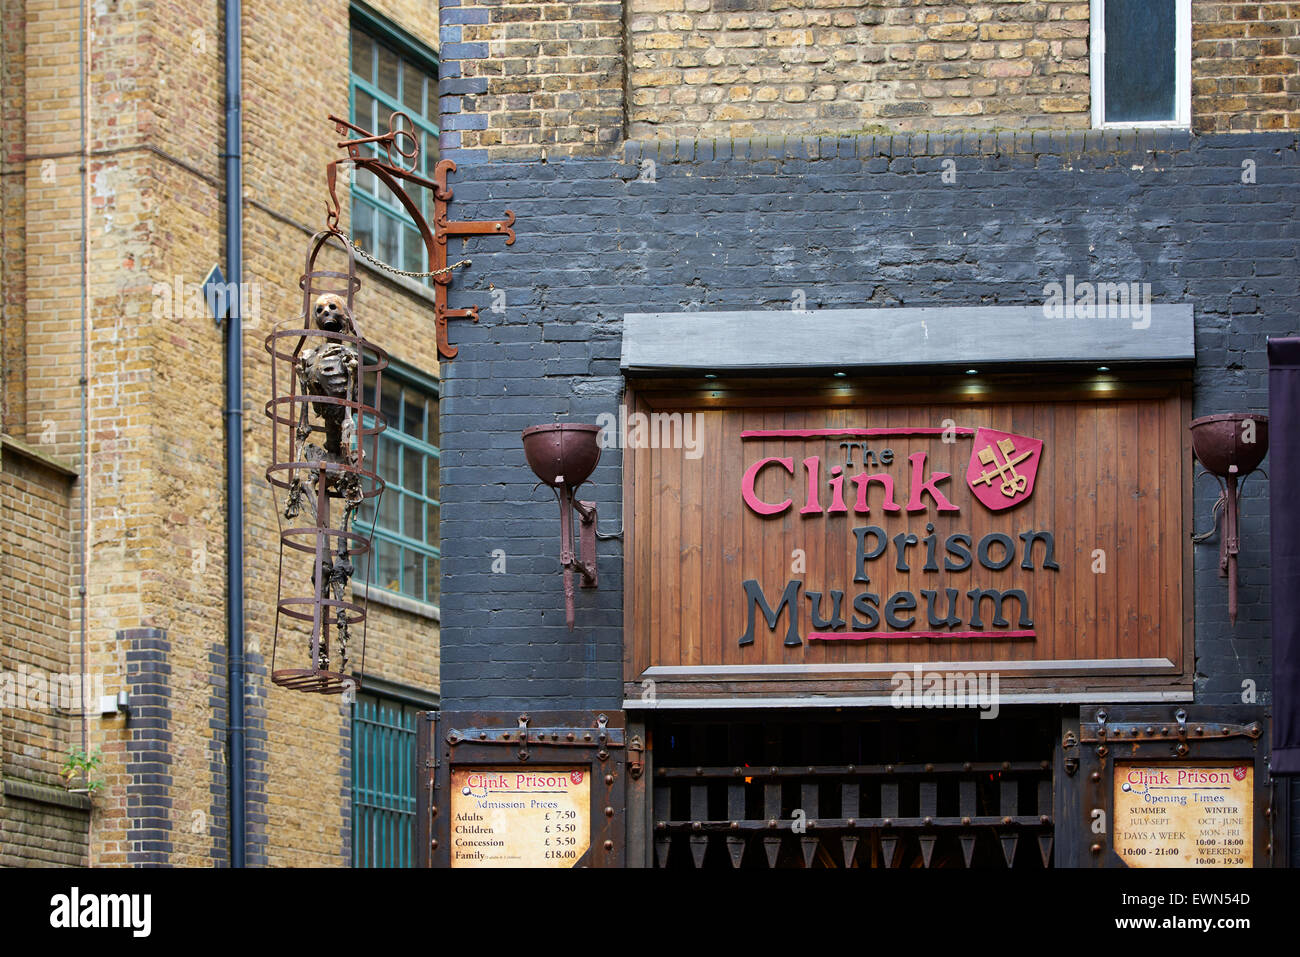 LONDON, UK - JUNE 23: Entrance to The Clink prison museum, which exhibits medieval torture tools, with replica of skeleton in ca Stock Photo